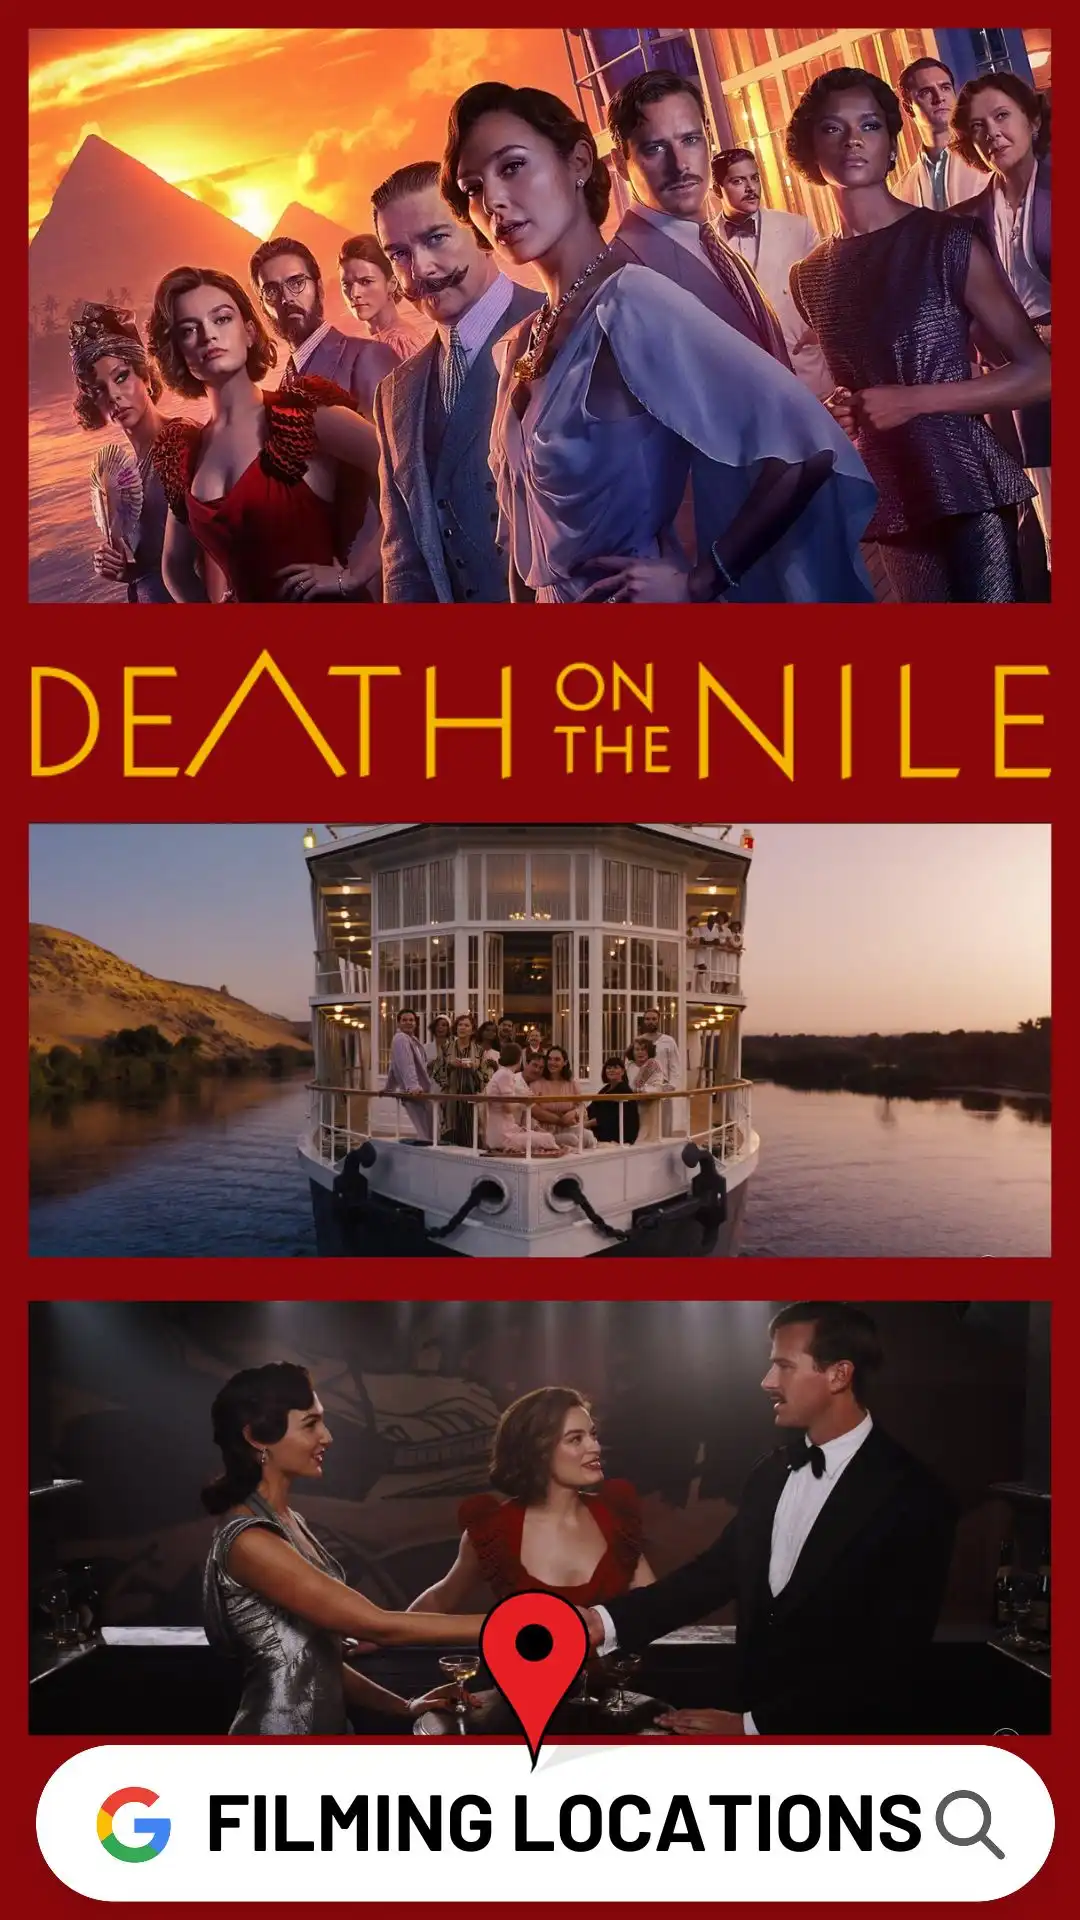 Death on the Nile Filming Locations